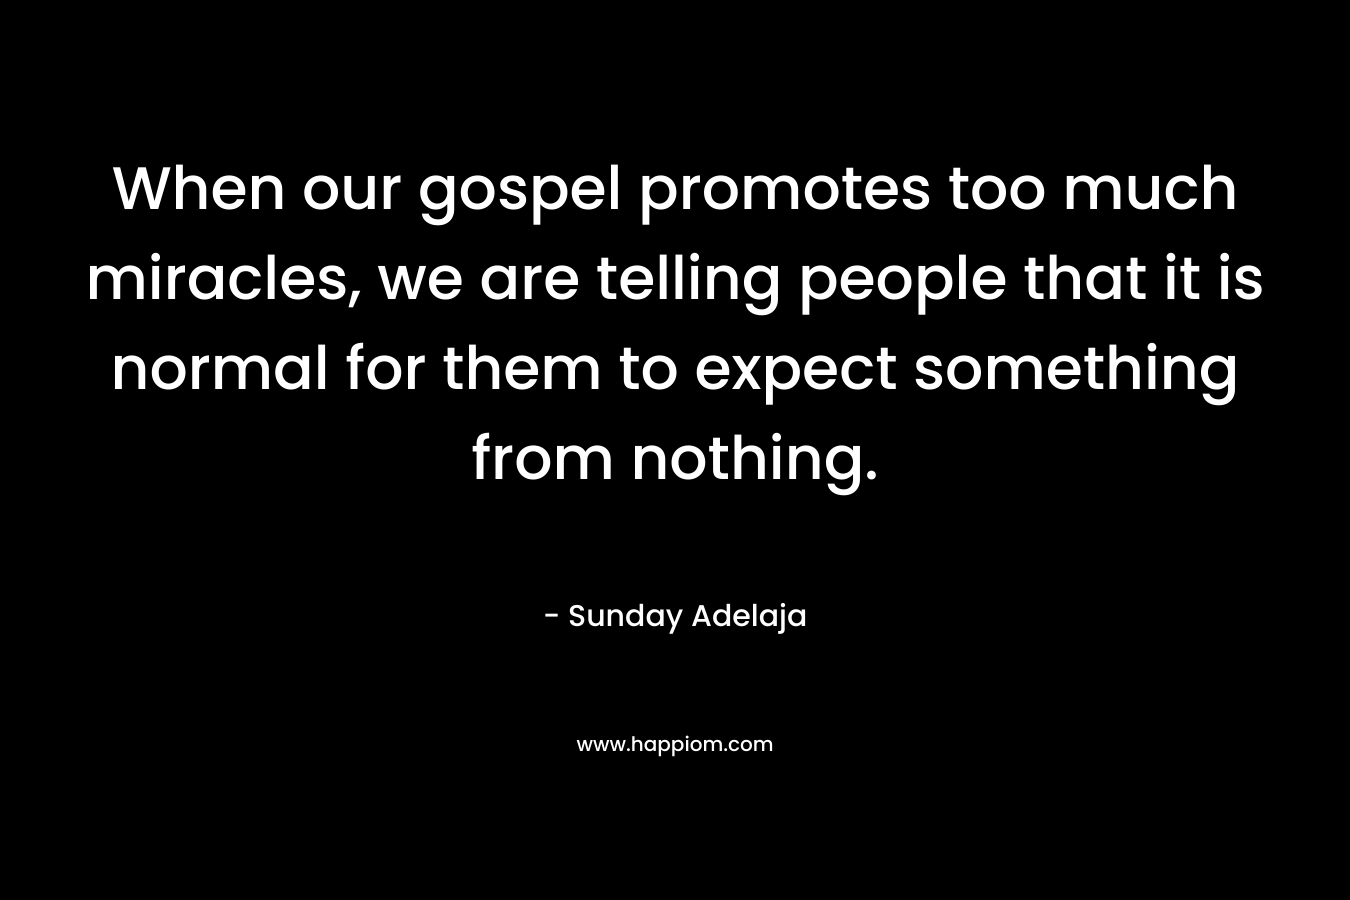 When our gospel promotes too much miracles, we are telling people that it is normal for them to expect something from nothing. – Sunday Adelaja